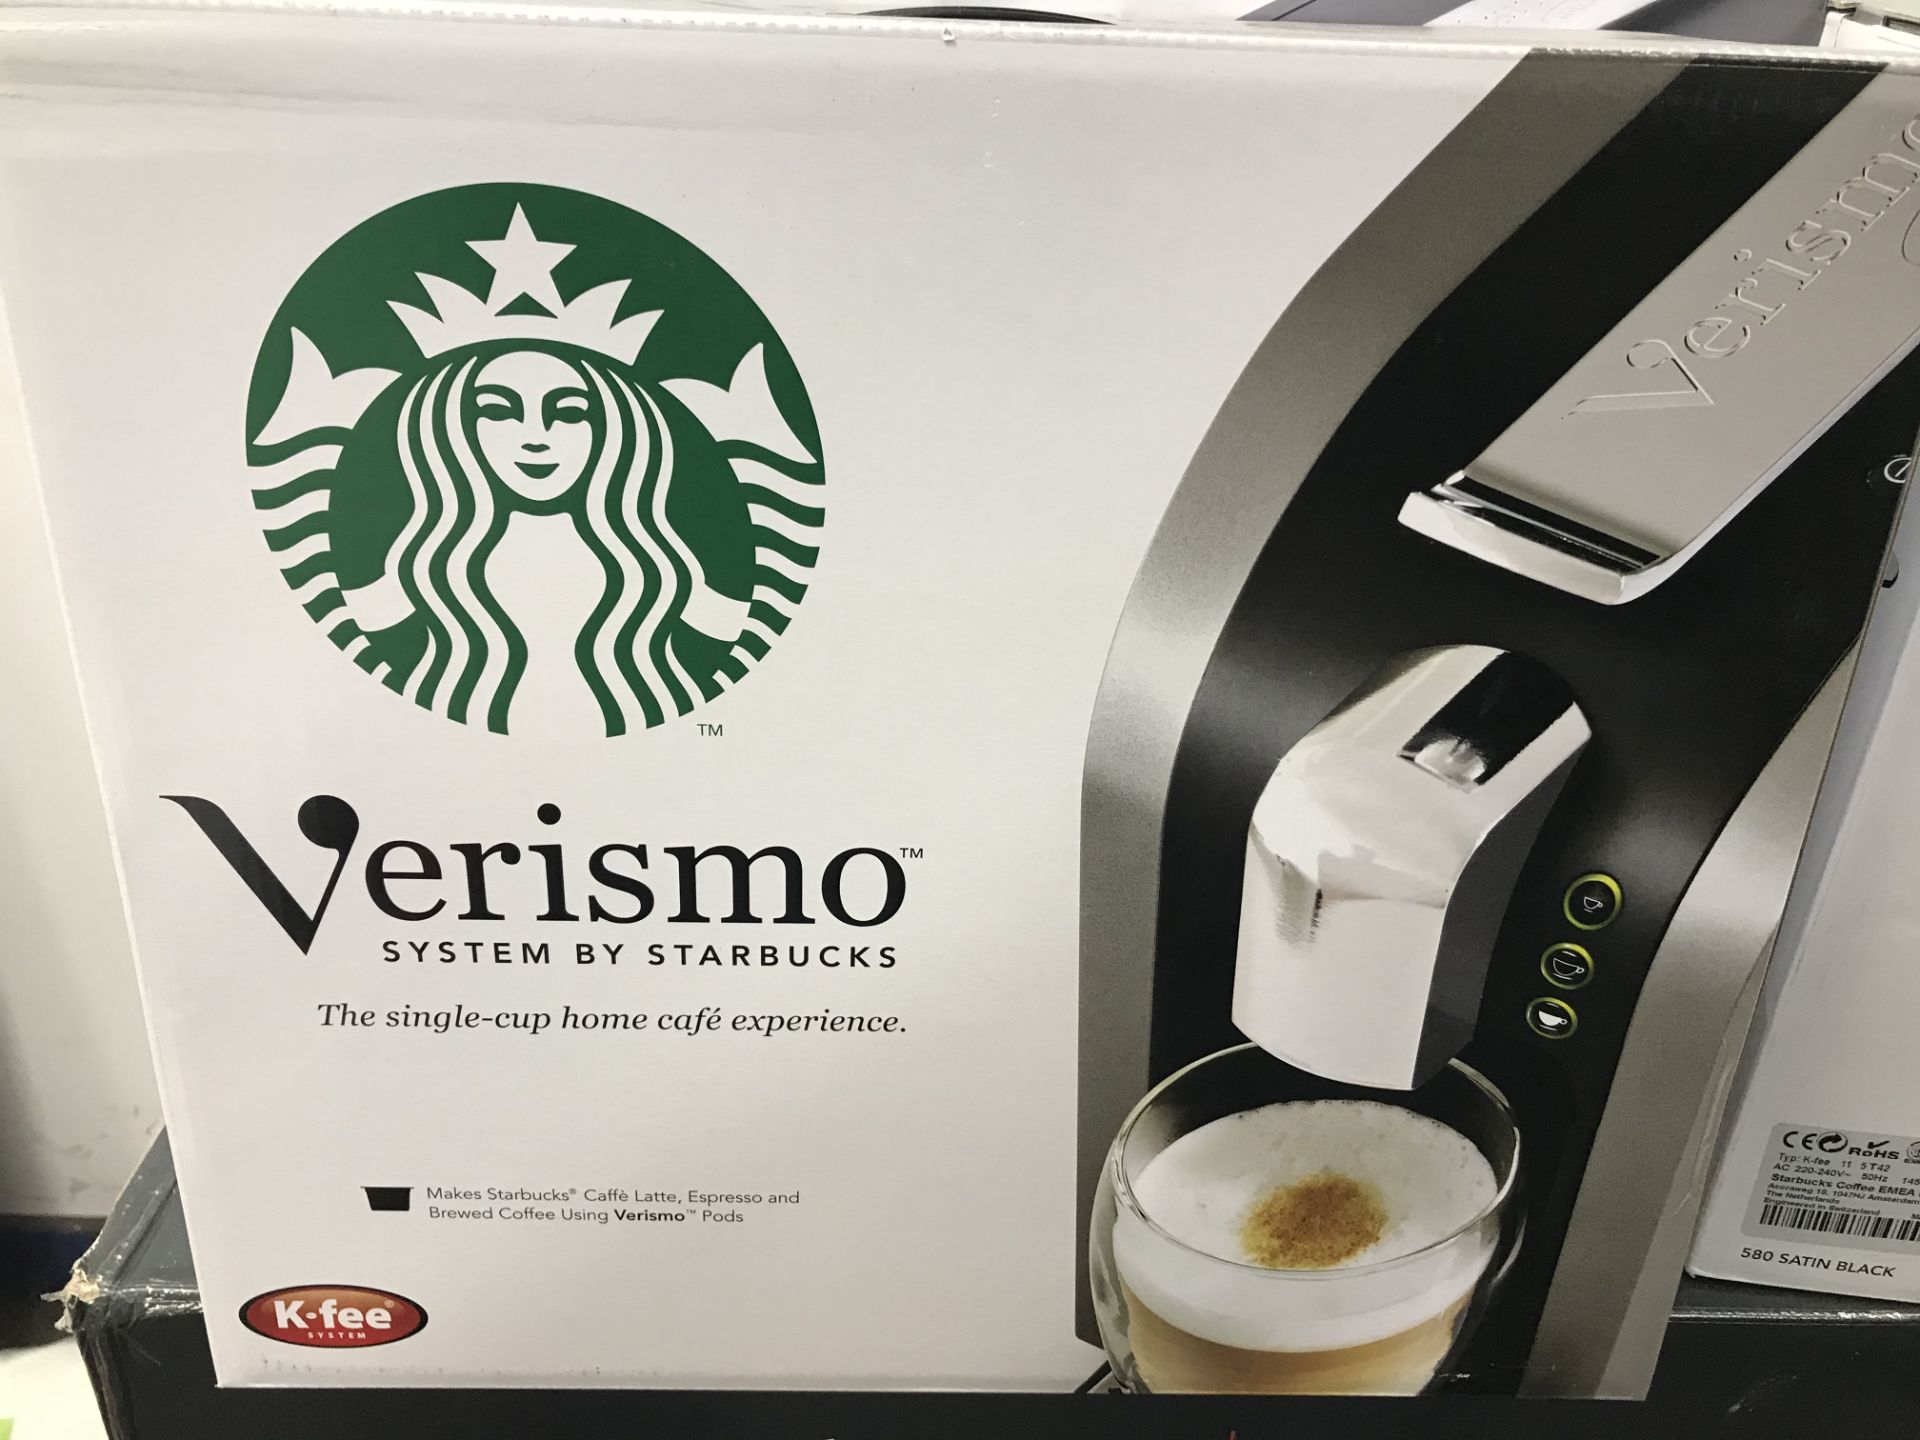 RETAIL BOXED VERISMO SYSTEMS BY STARBUCKS SILVER COFFEE MACHINE 3.5LTR